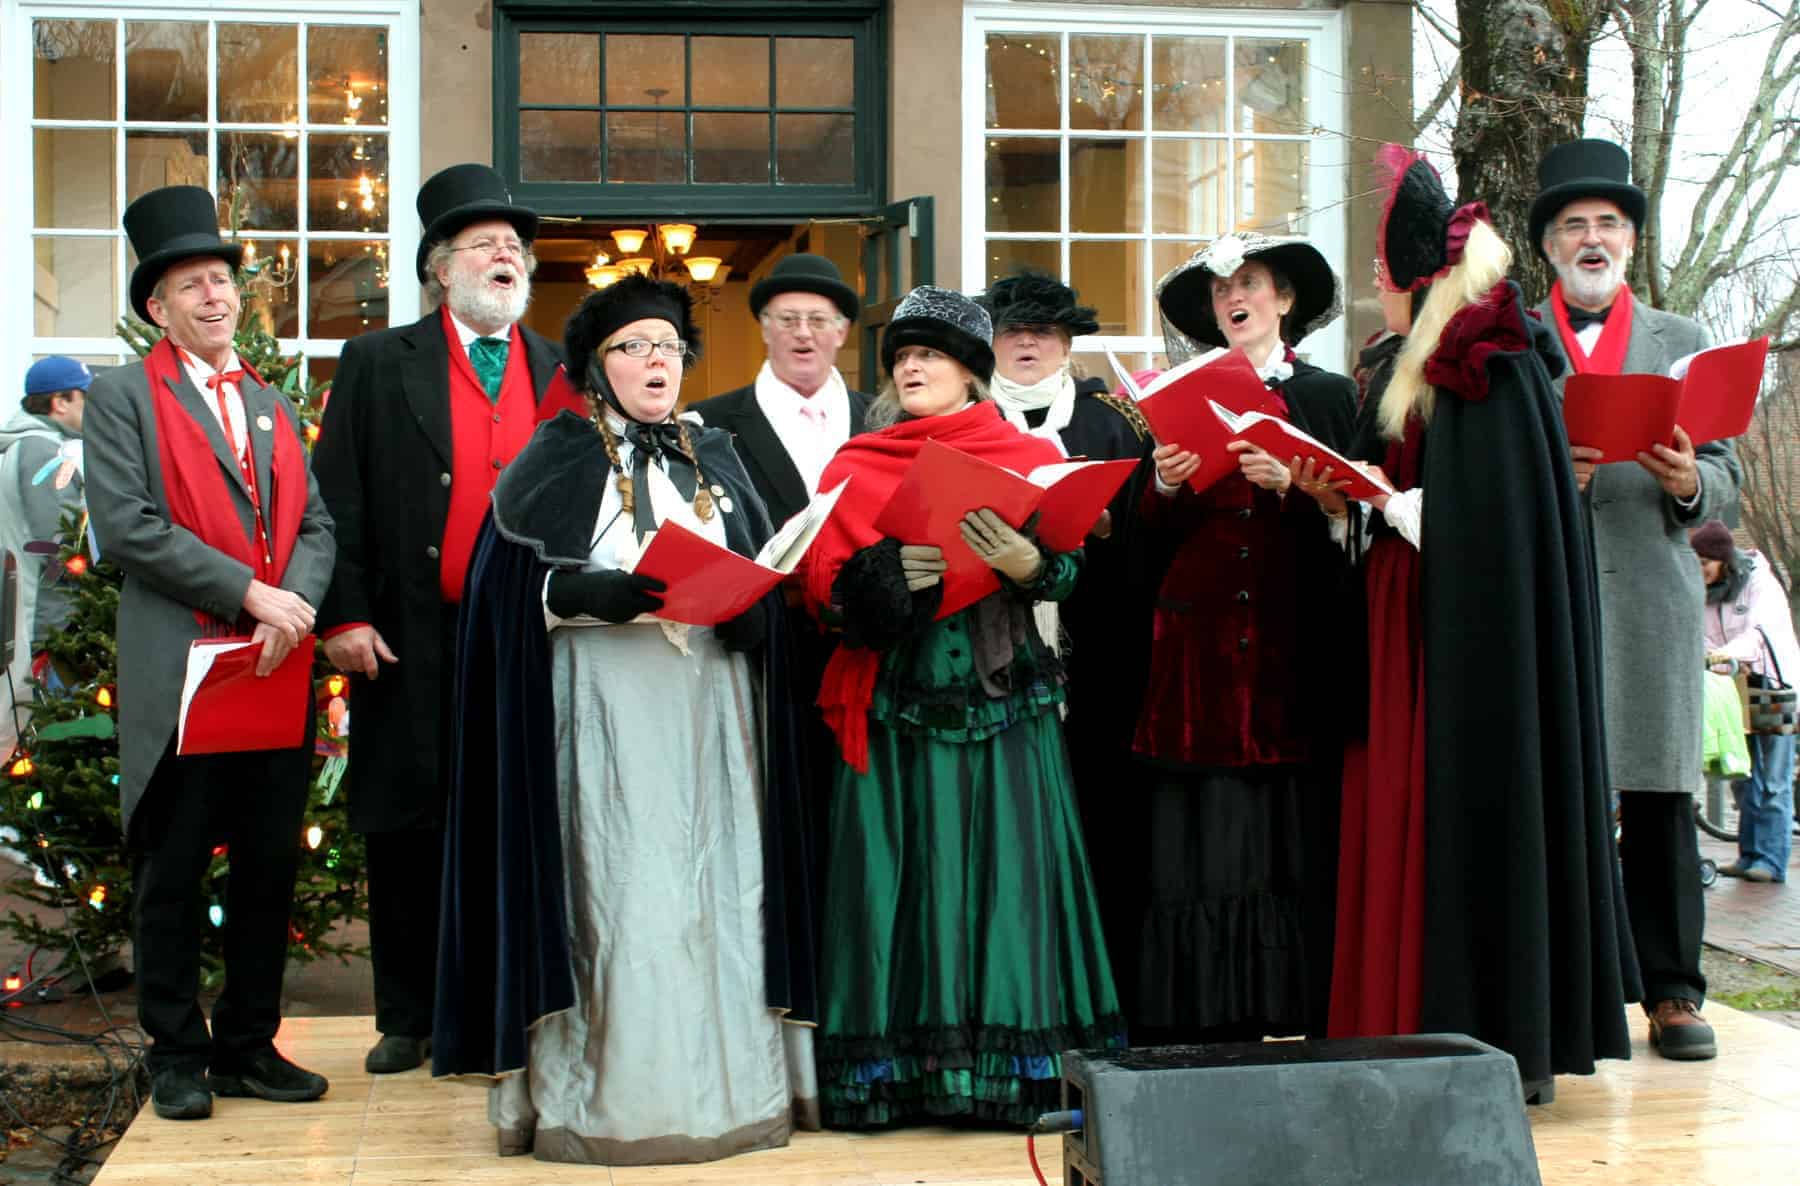 Sing classic Christmas carols. | CC by 2.0, Massachusets Office of Travel and Tourism via Flickr.com